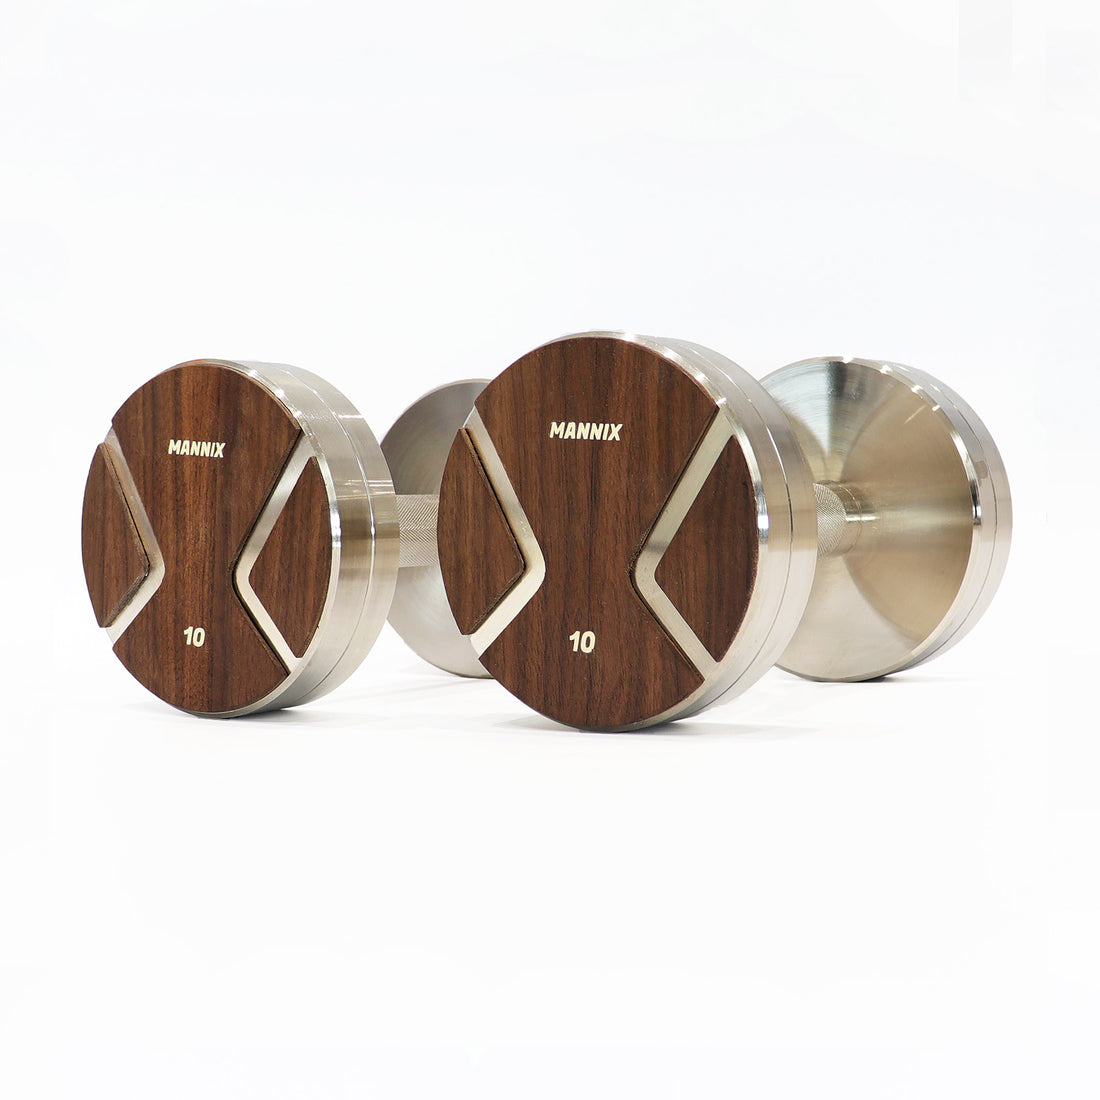 Mannix Sports 10kg Walnut-Faced Nickel Plated Dumbbell Pair